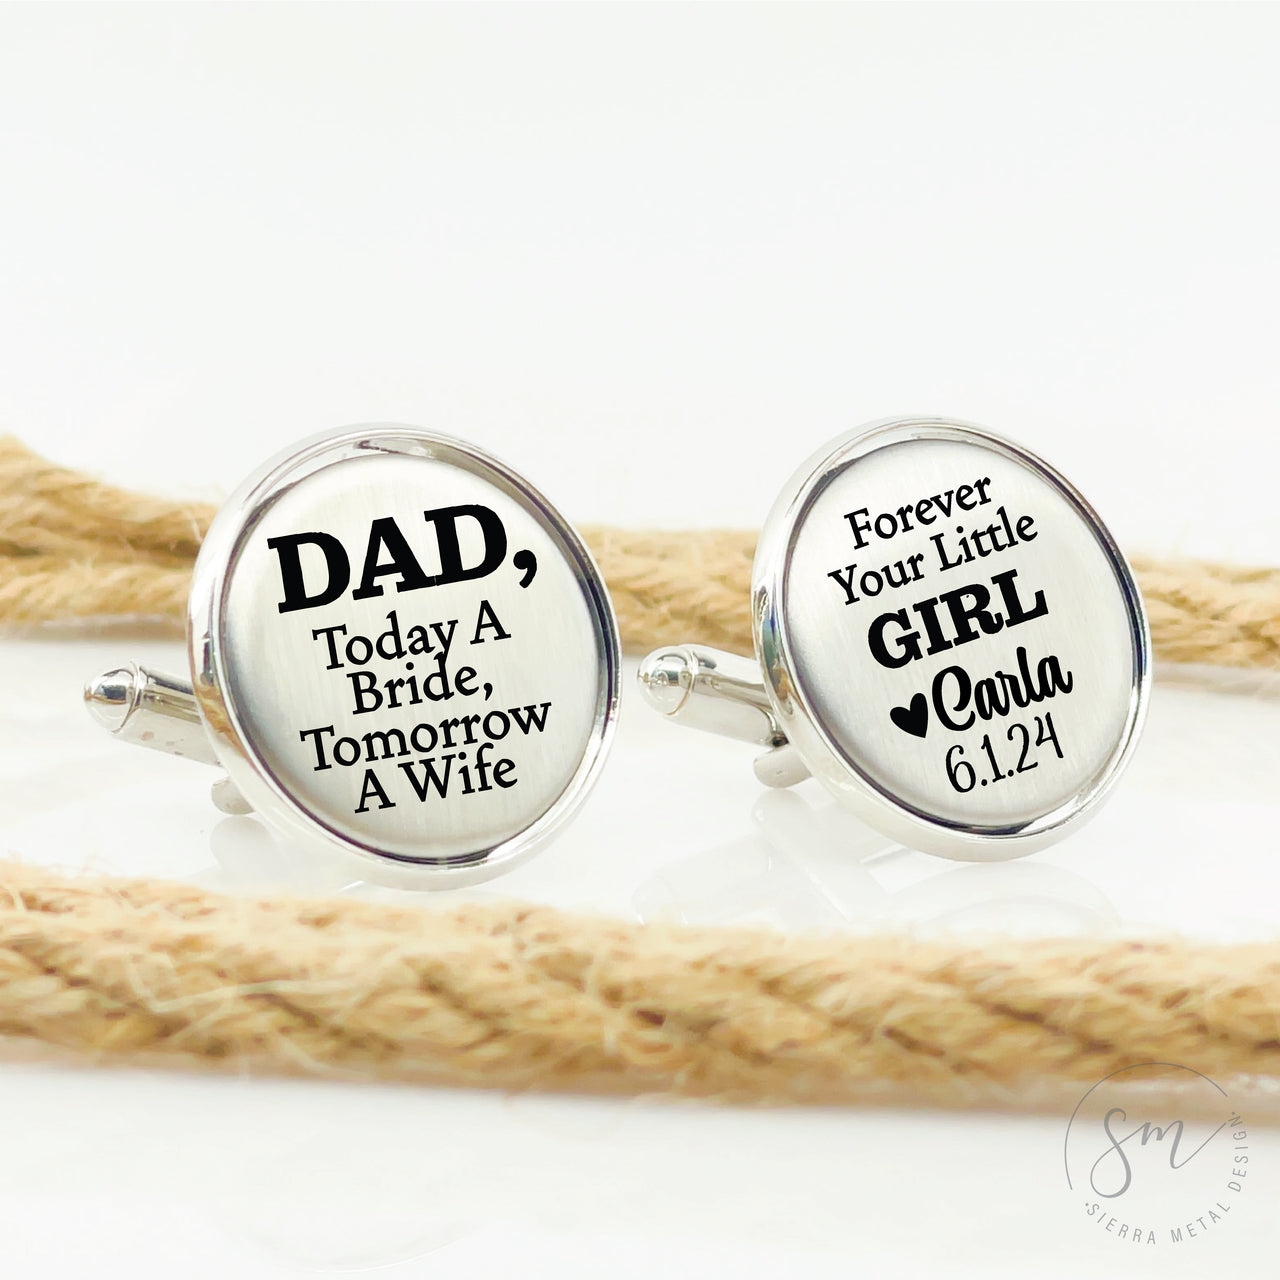 Today A Bride Tomorrow A Wife Forever Your Little Girl Cufflinks